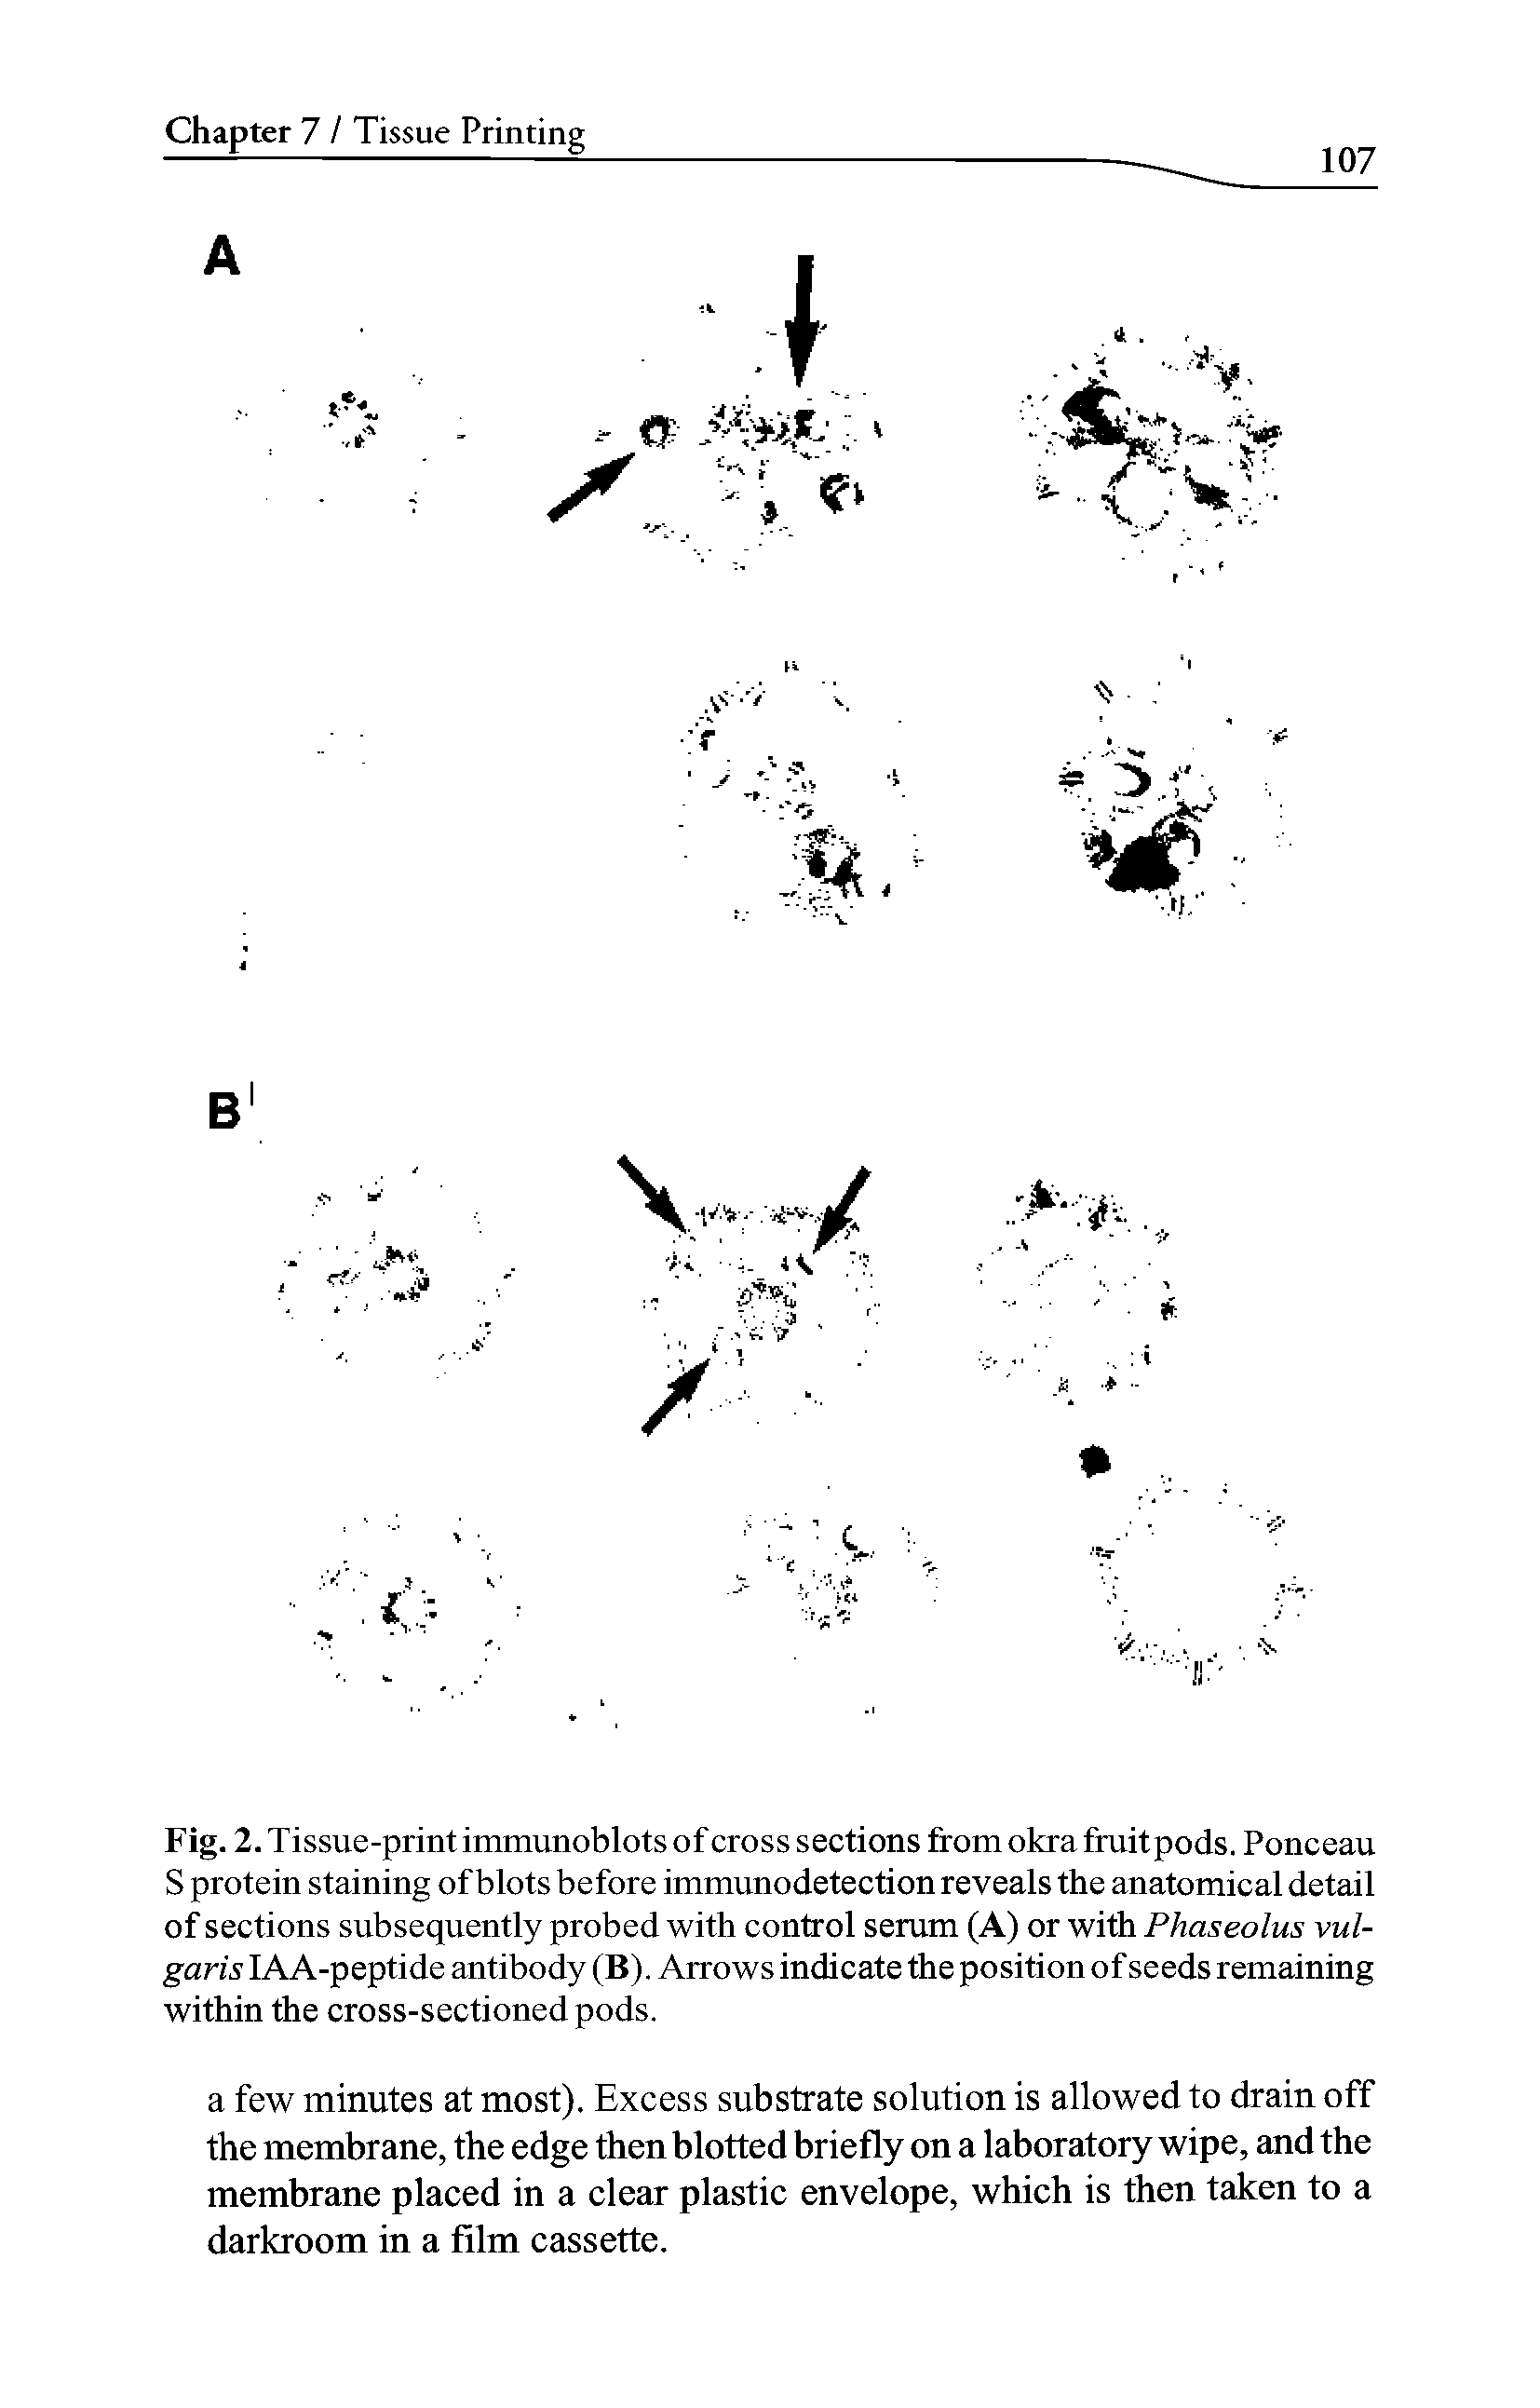 Fig. 2. Tissue-print immunoblots of cross sections from okrafruitpods. Ponceau S protein staining of blots before immunodetection reveals the anatomical detail of sections subsequently probed with control serum (A) or with Phaseolus vulgaris IAA-peptide antibody (B). Arrows indicate the position of seeds remaining within the cross-sectioned pods.